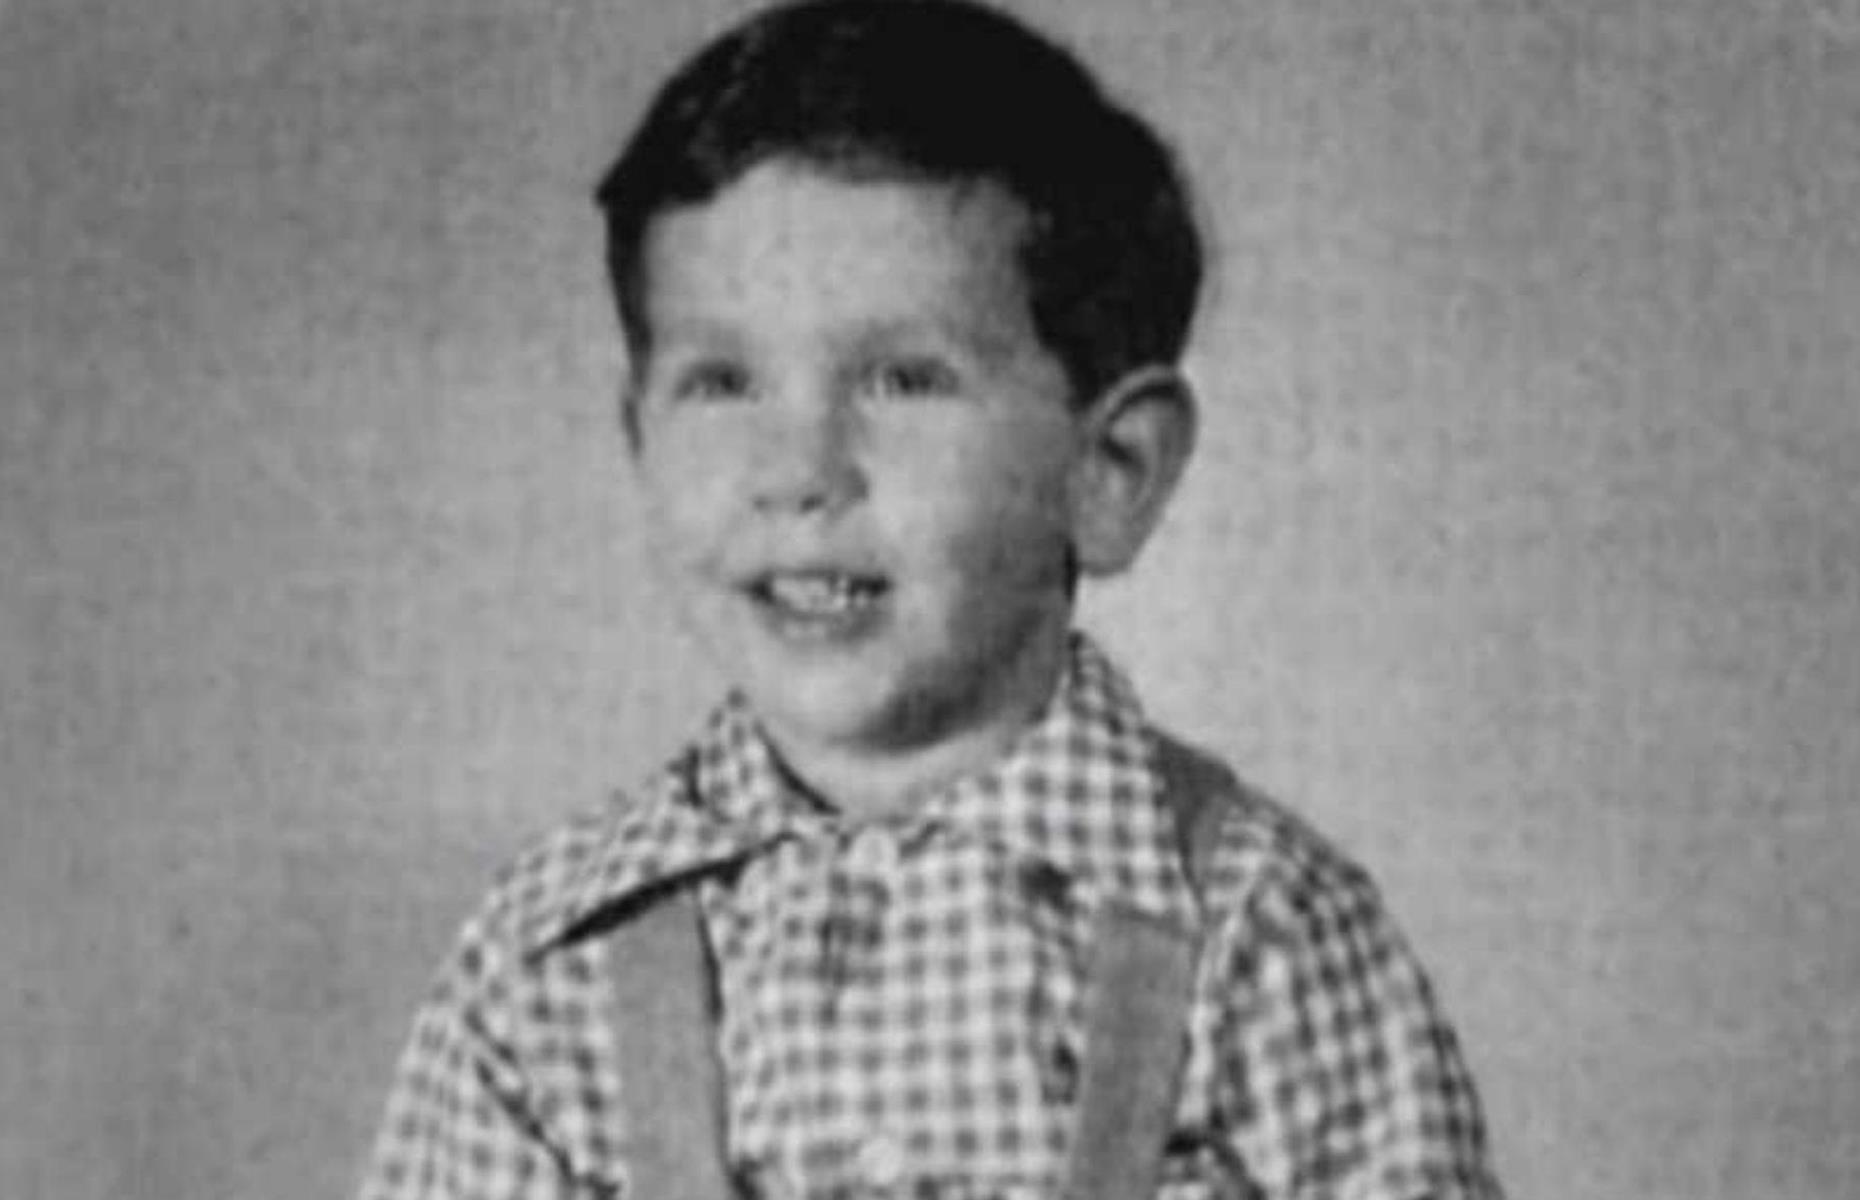 Larry Ellison didn't discover he was adopted until he was 12 years old